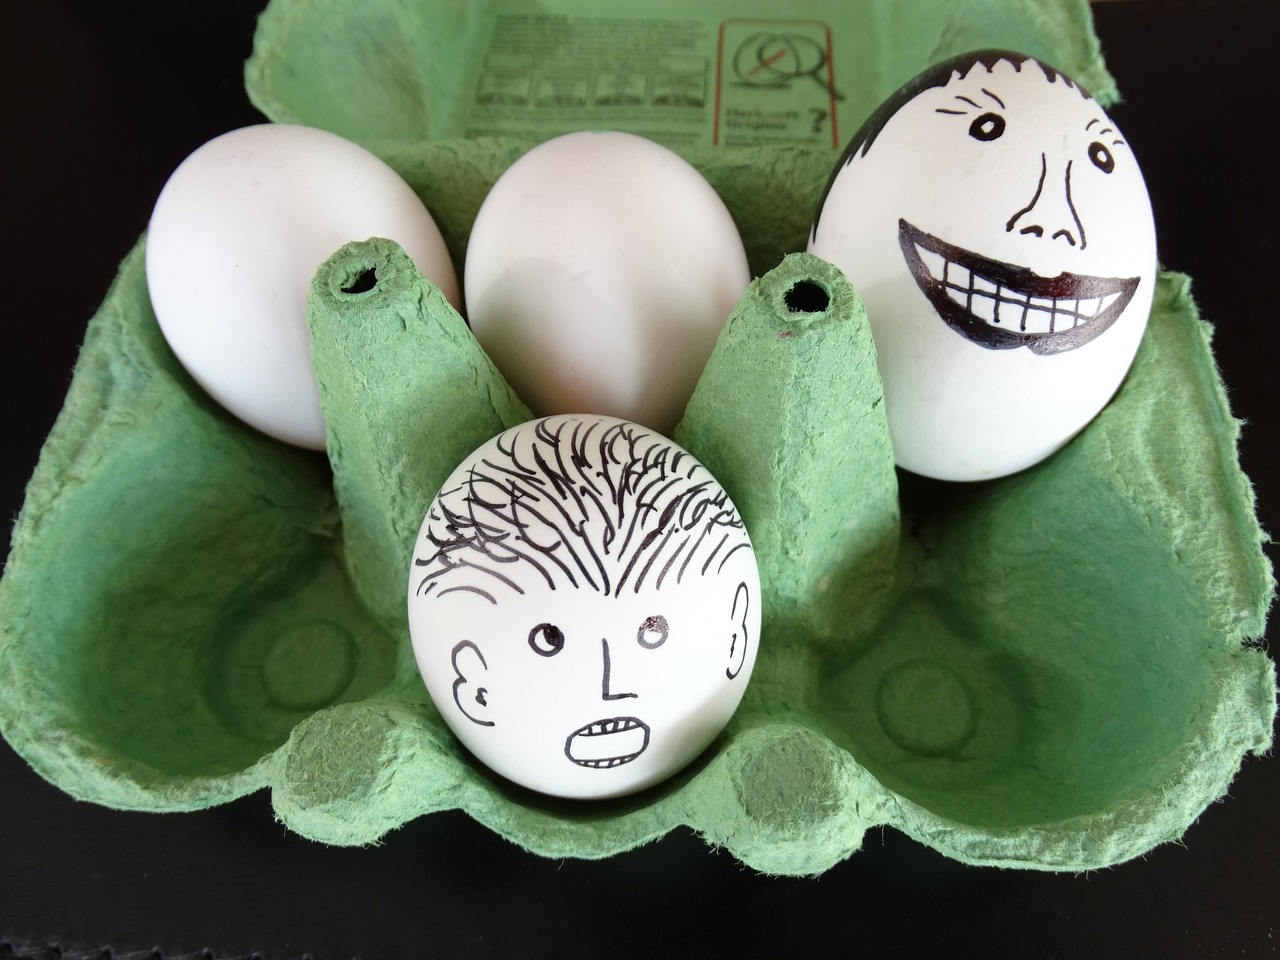 Egg Painted Faces Funny Egg Carton Free Image From Needpix Com